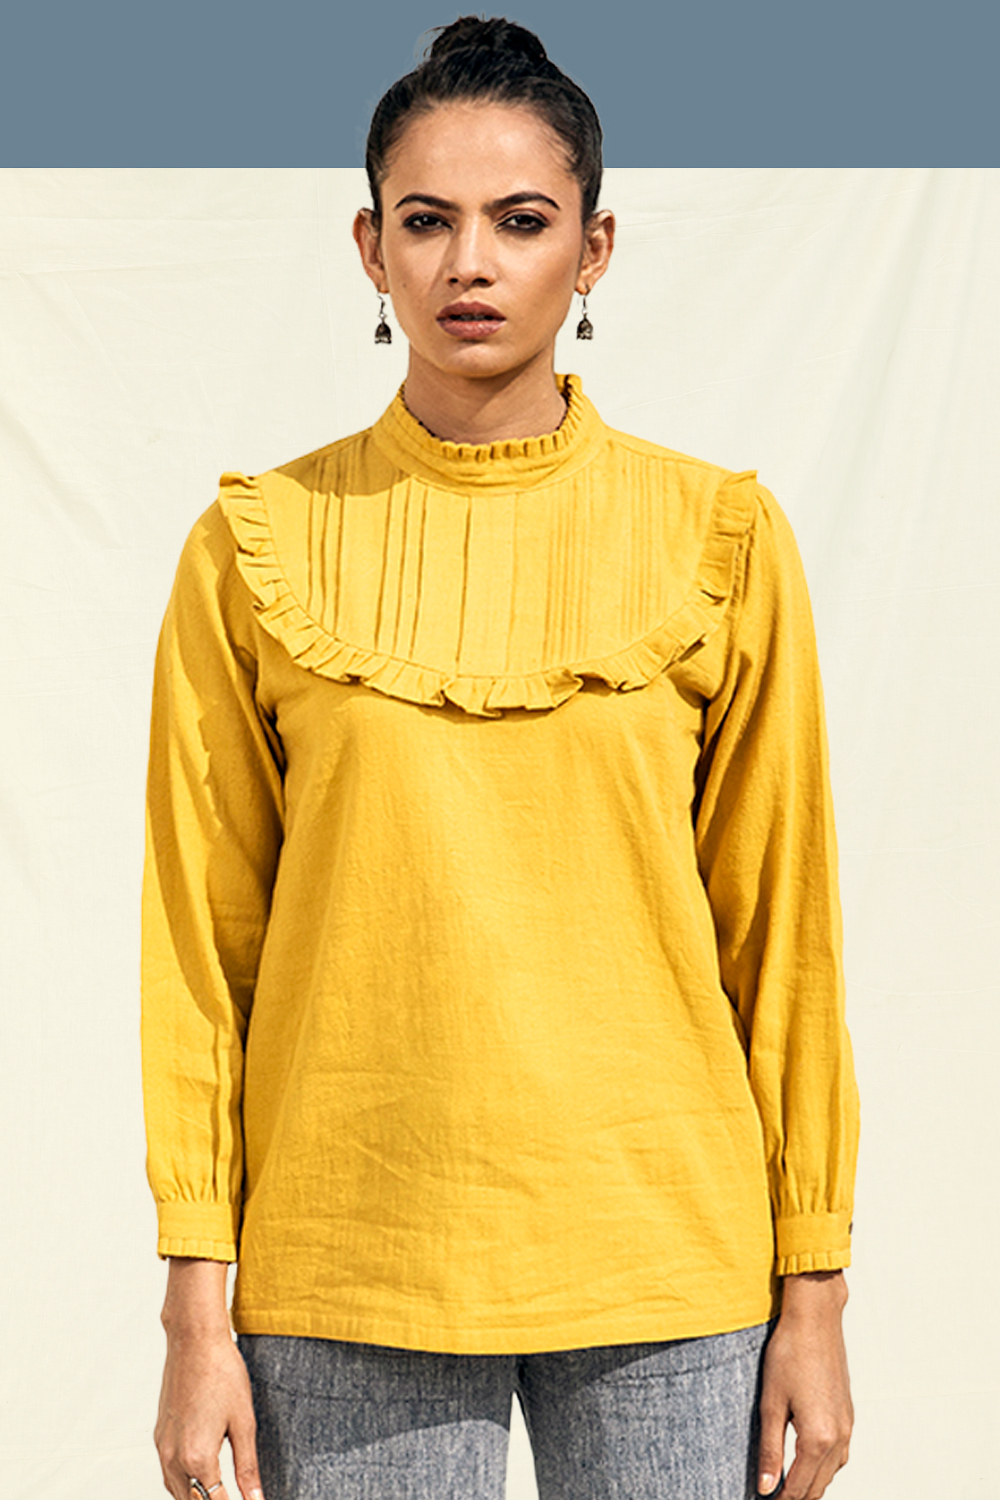 Women's organic cotton top with sleeves. Handwoven Kala Cotton Intricate Neck Detail Blouse in Yellow. Vegan clothing online